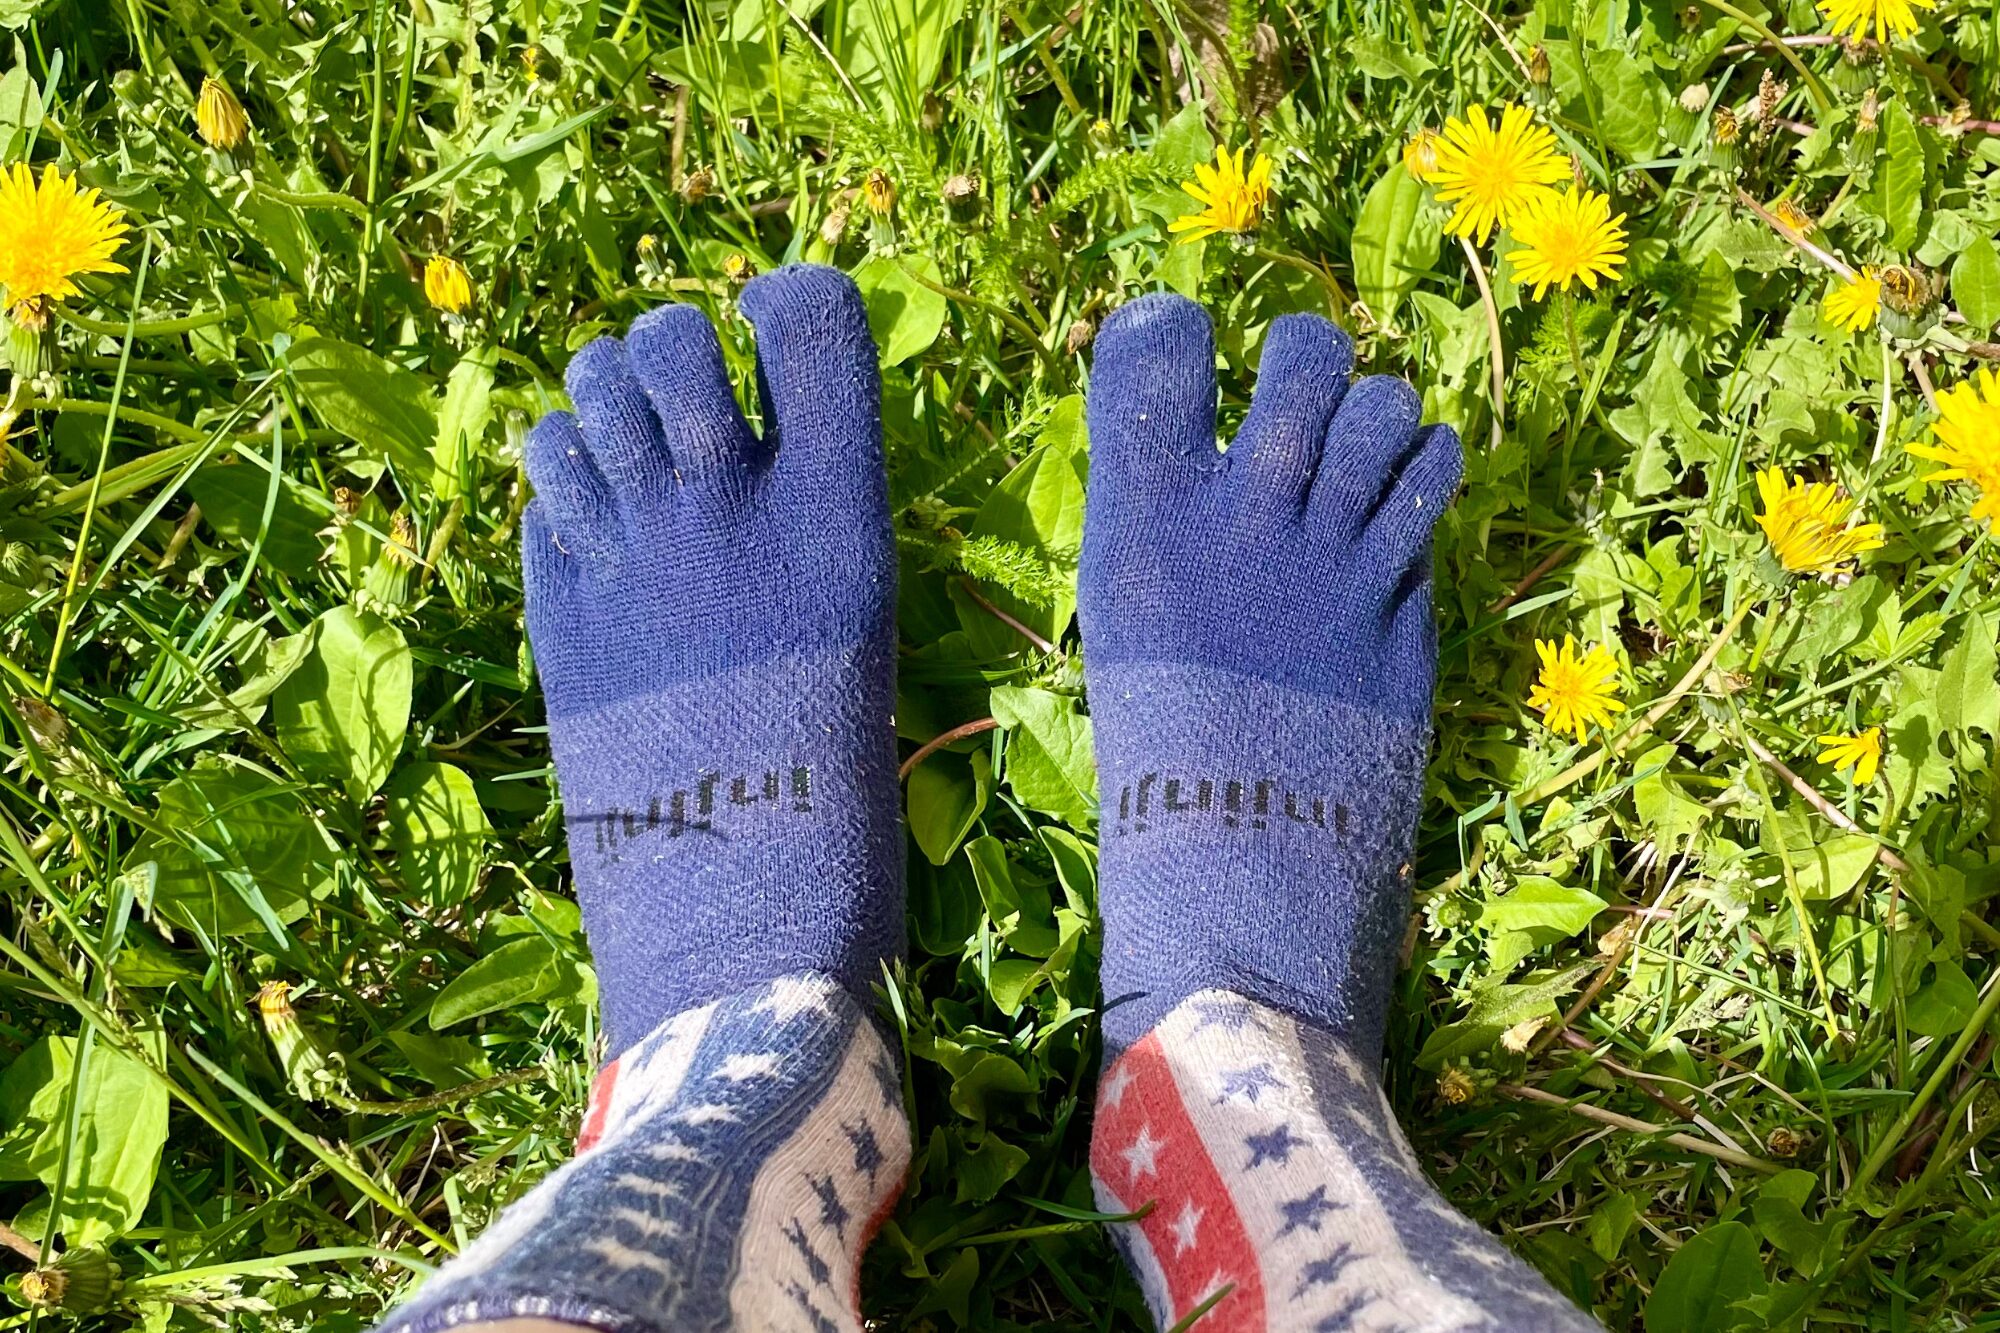 A hiker's feet are showne wearing Injinji toesocks on a grassy background with dandelions.